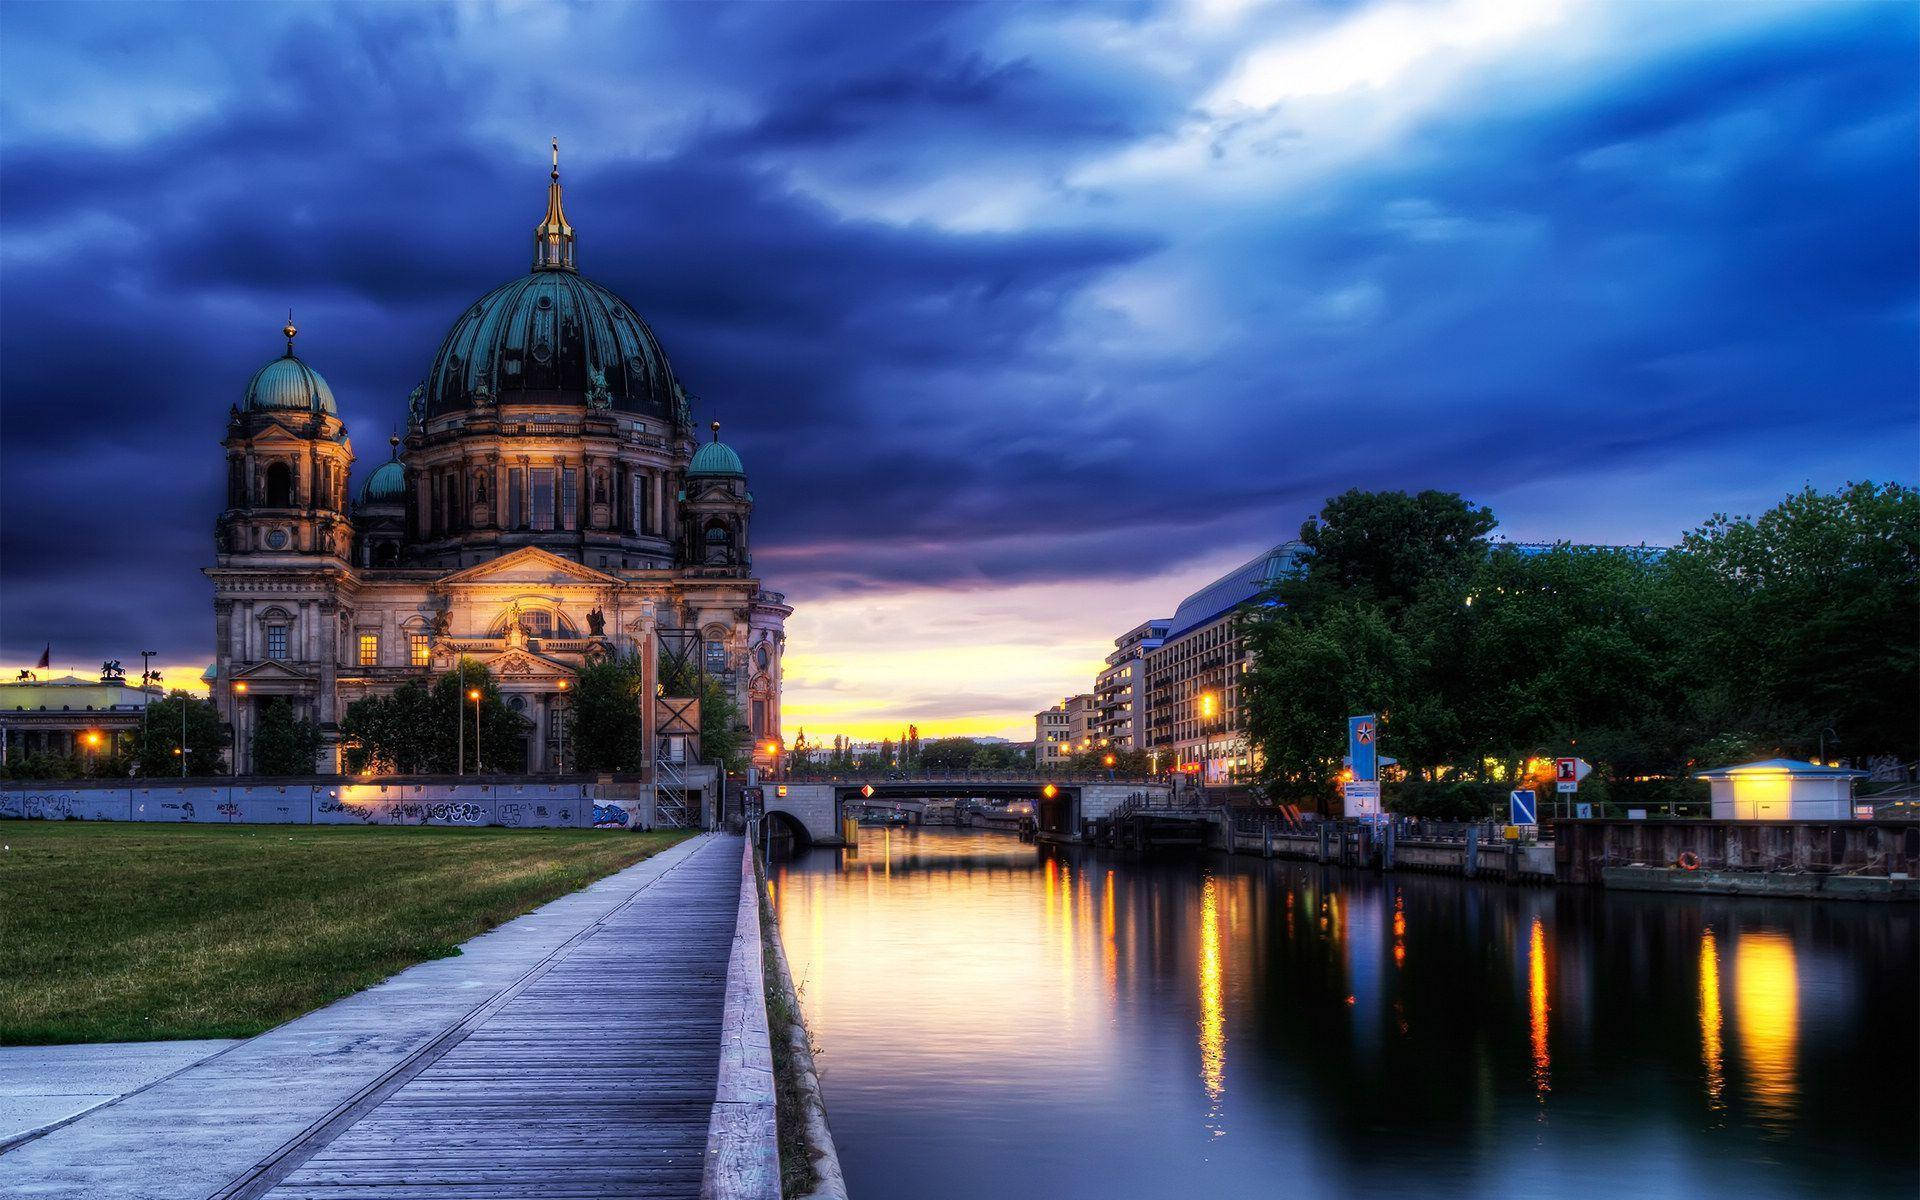 Berlin Cathedral Low Angle Picture